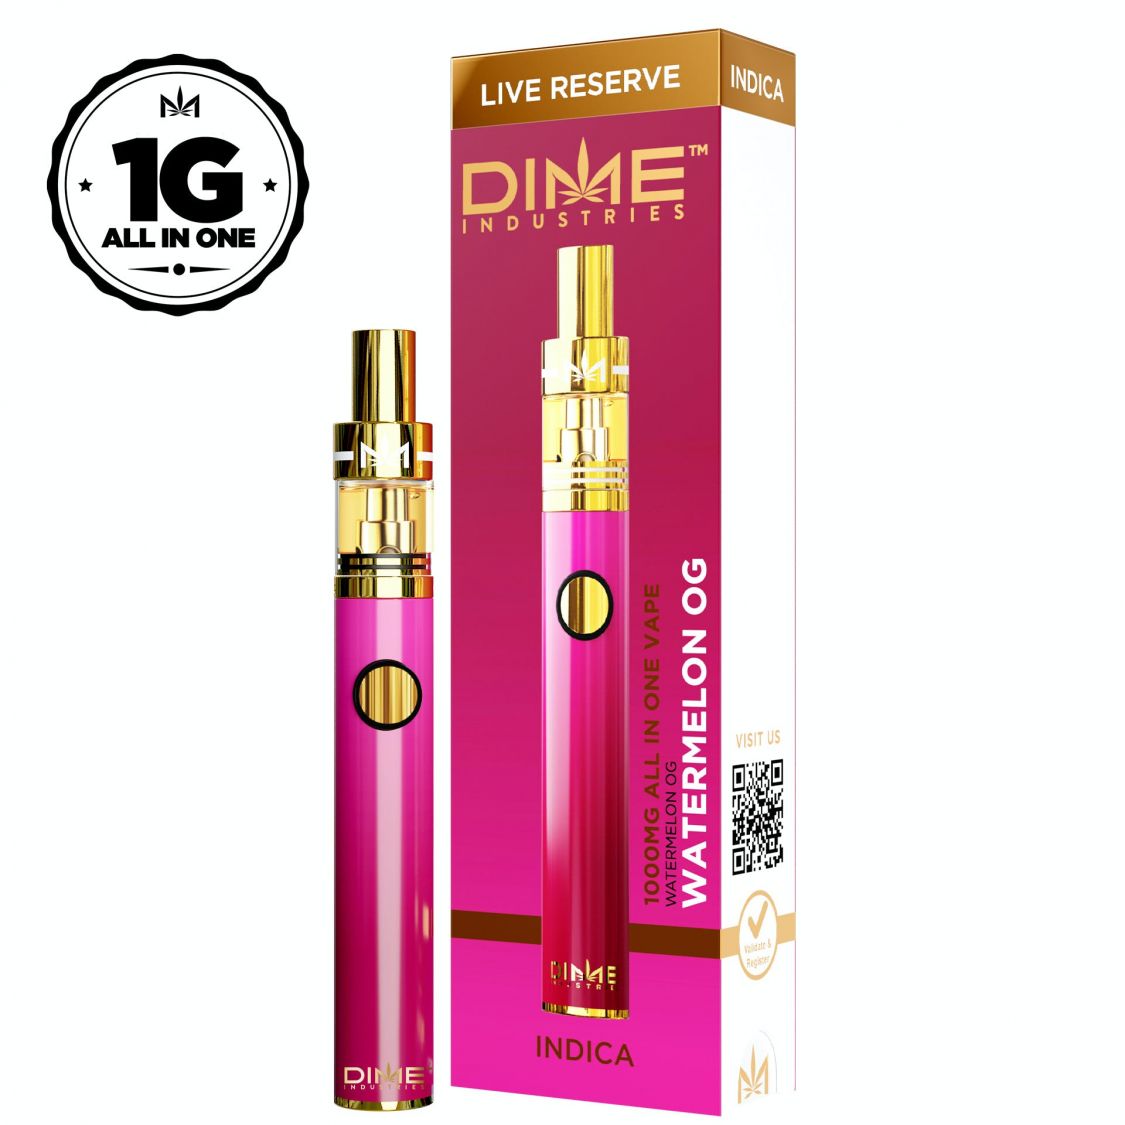 DIME Industries Watermelon OG Live Reserve All-In-One Disposable Vaporizers Disposable